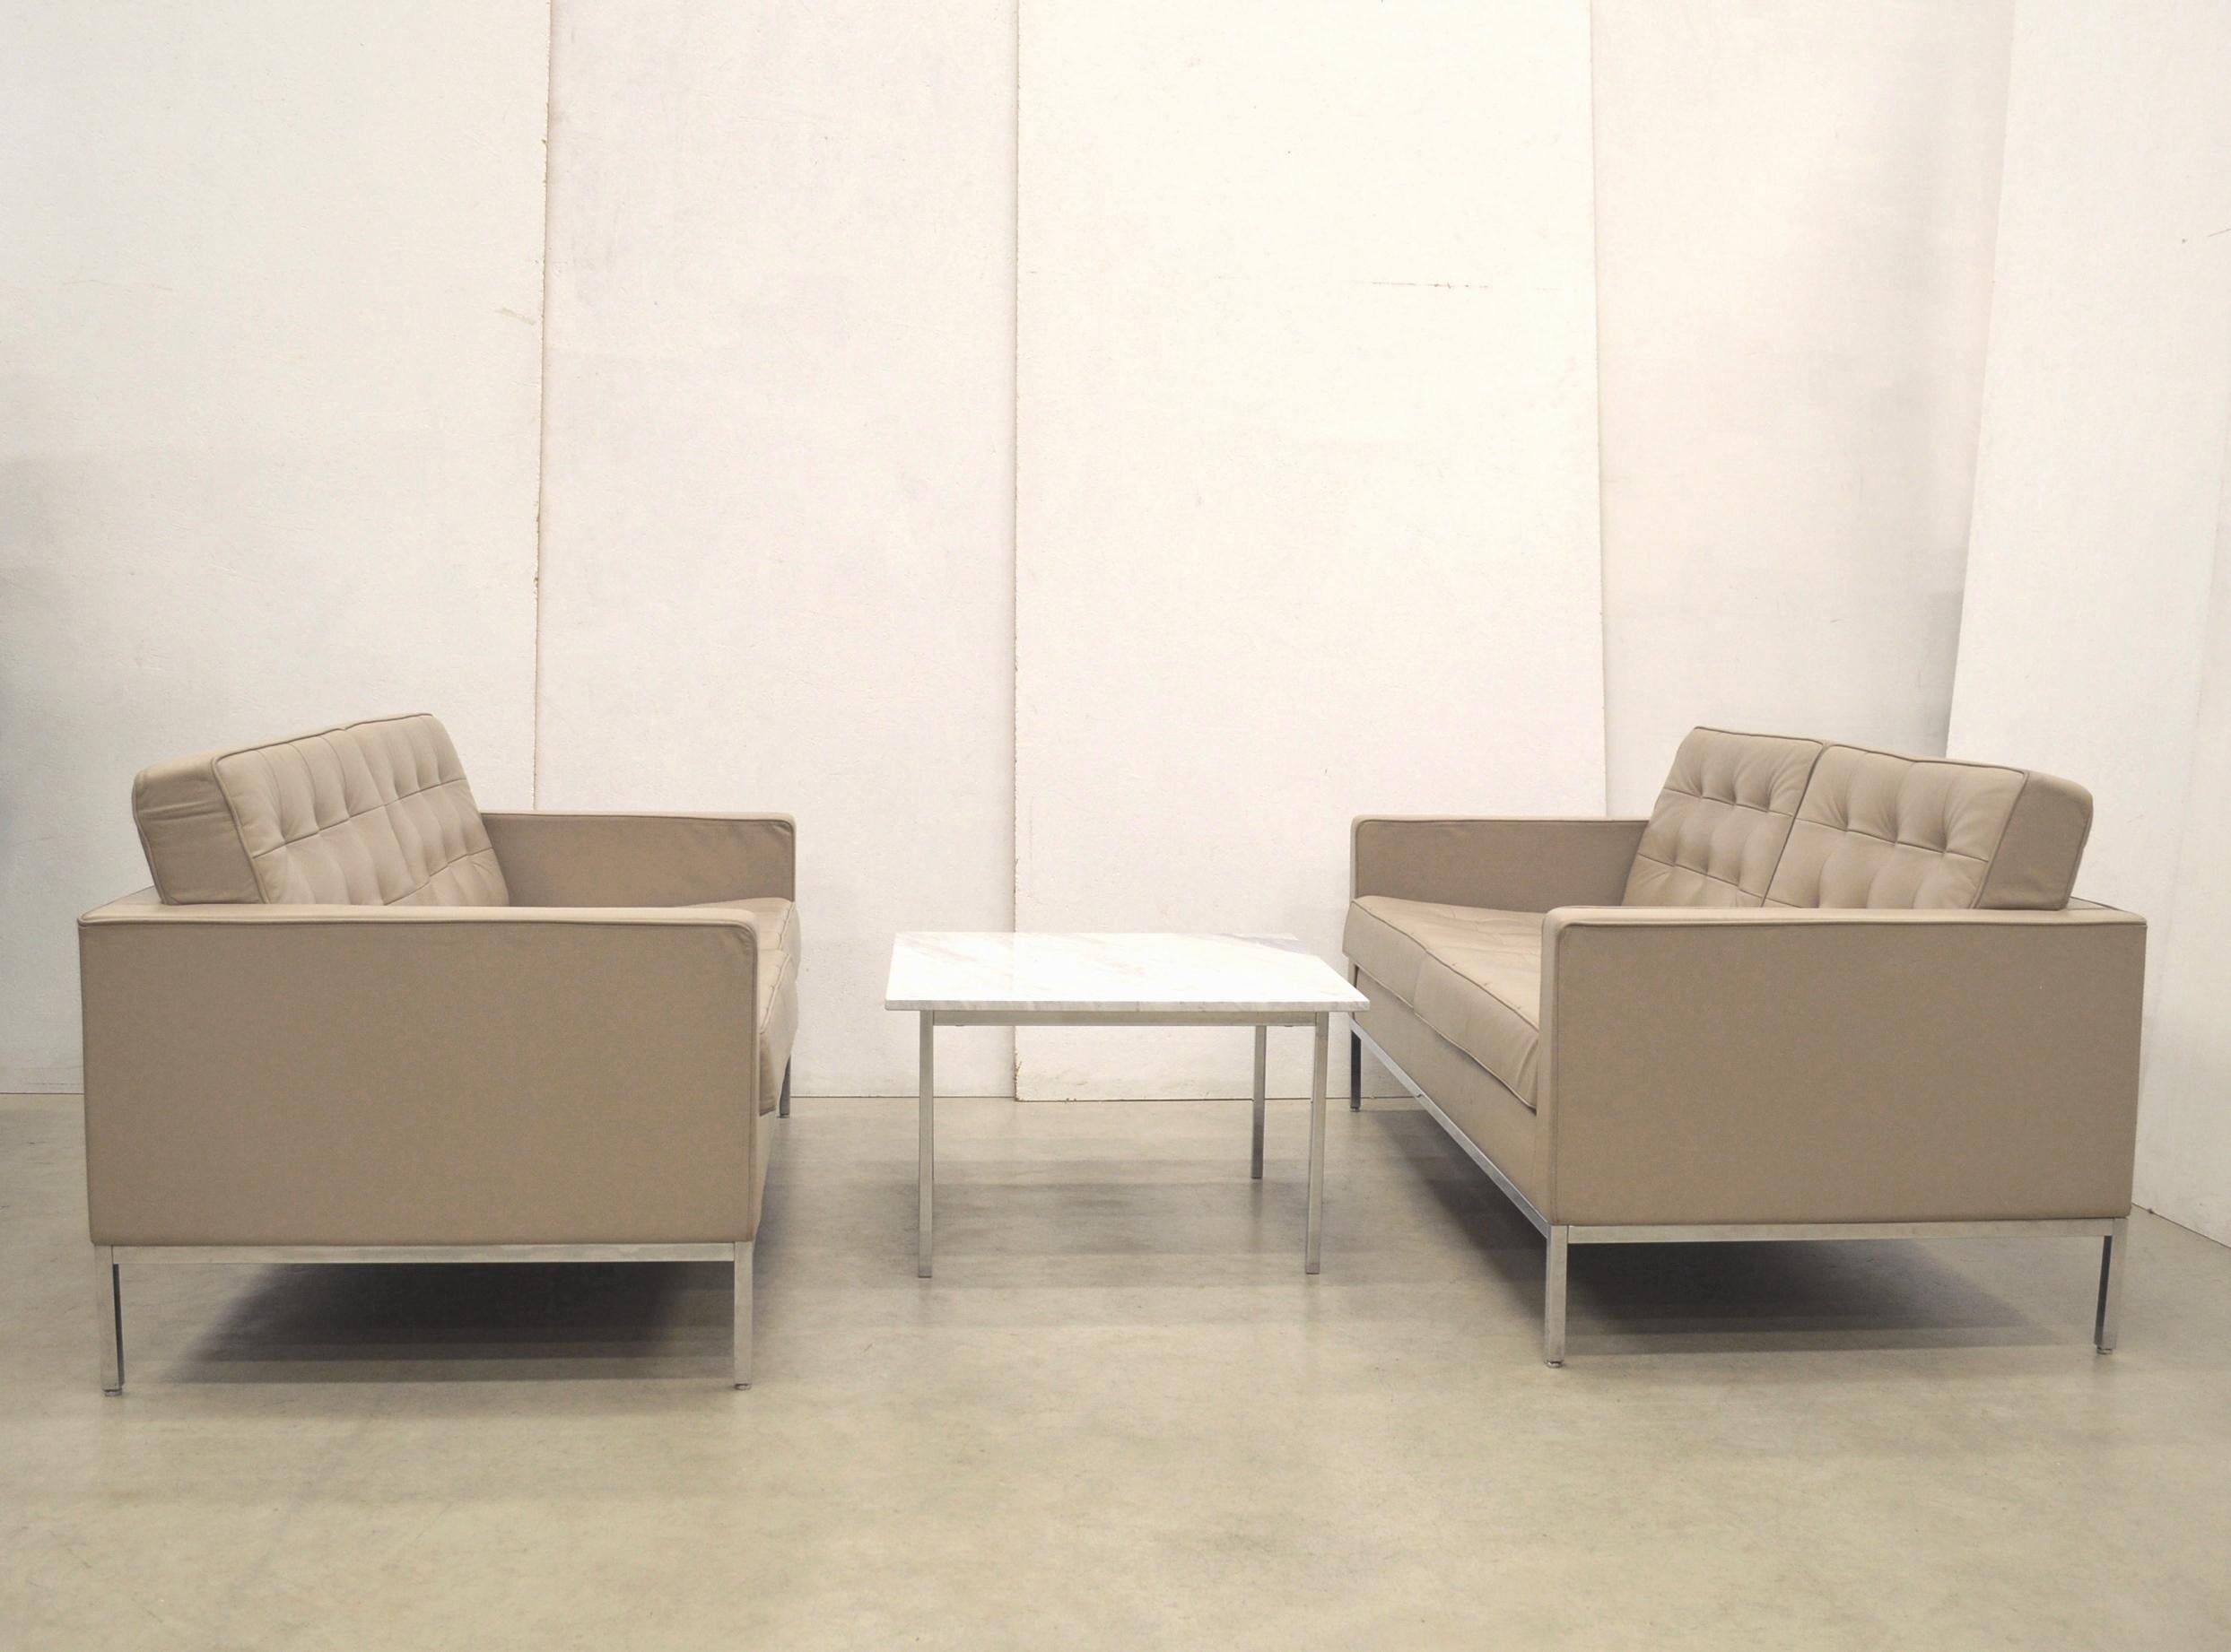 These timeless iconic sofas were designed in 1954 by Florence Knoll and produced by Knoll International in the early 2000s. 

The pieces are upholstered in sand beige leather and are in a very good and clean condition. 

The sofas are full covered